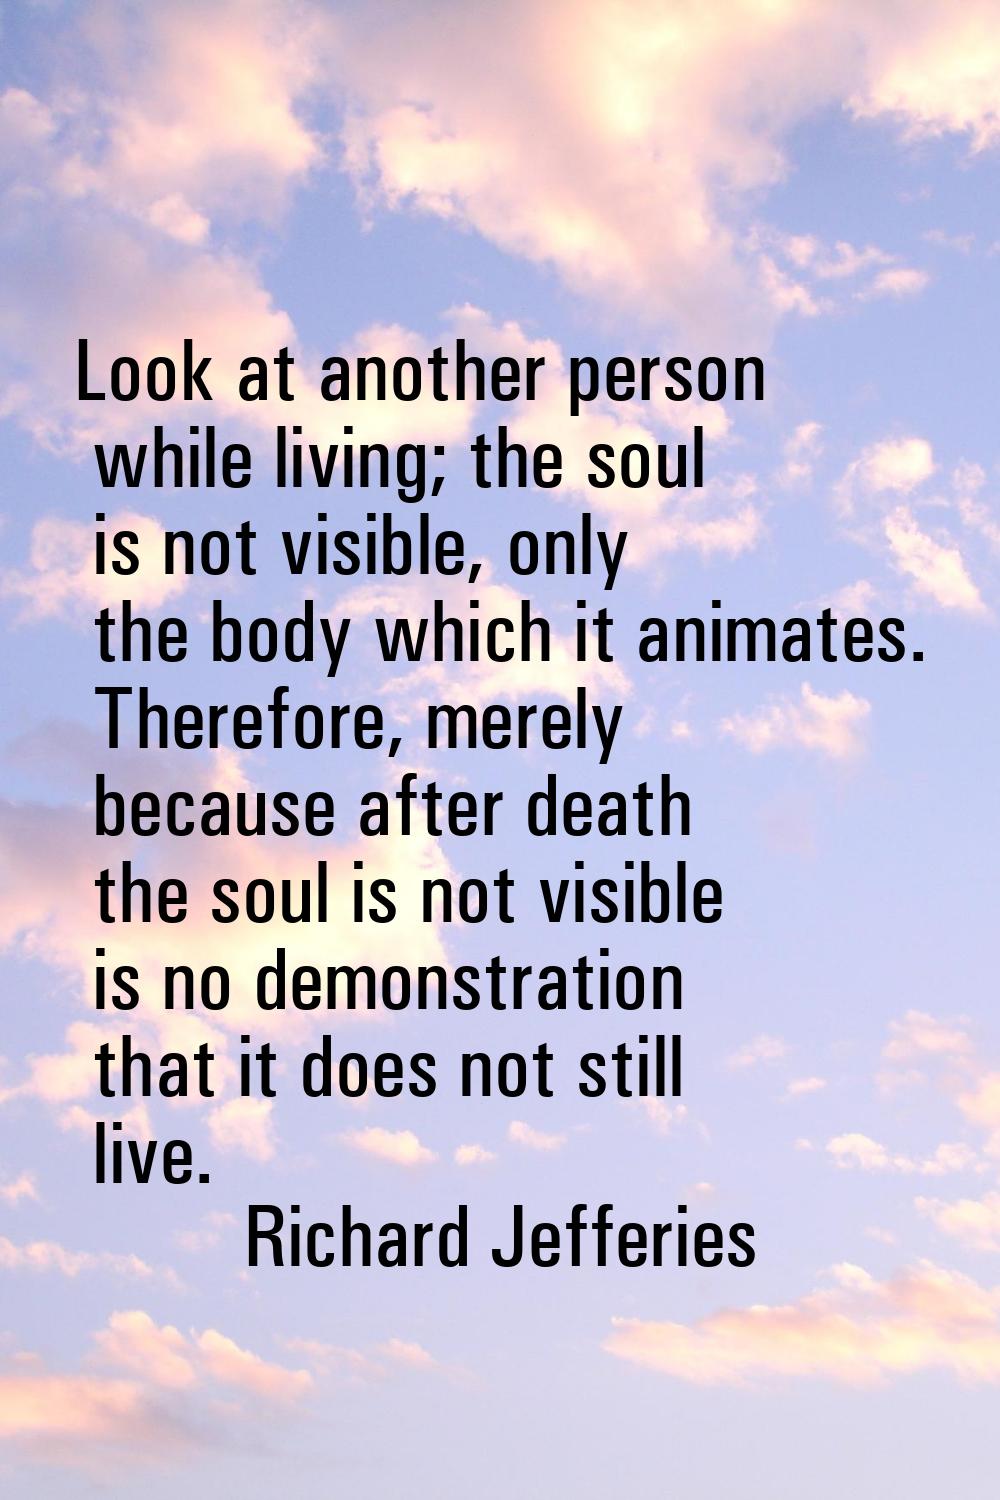 Look at another person while living; the soul is not visible, only the body which it animates. Ther